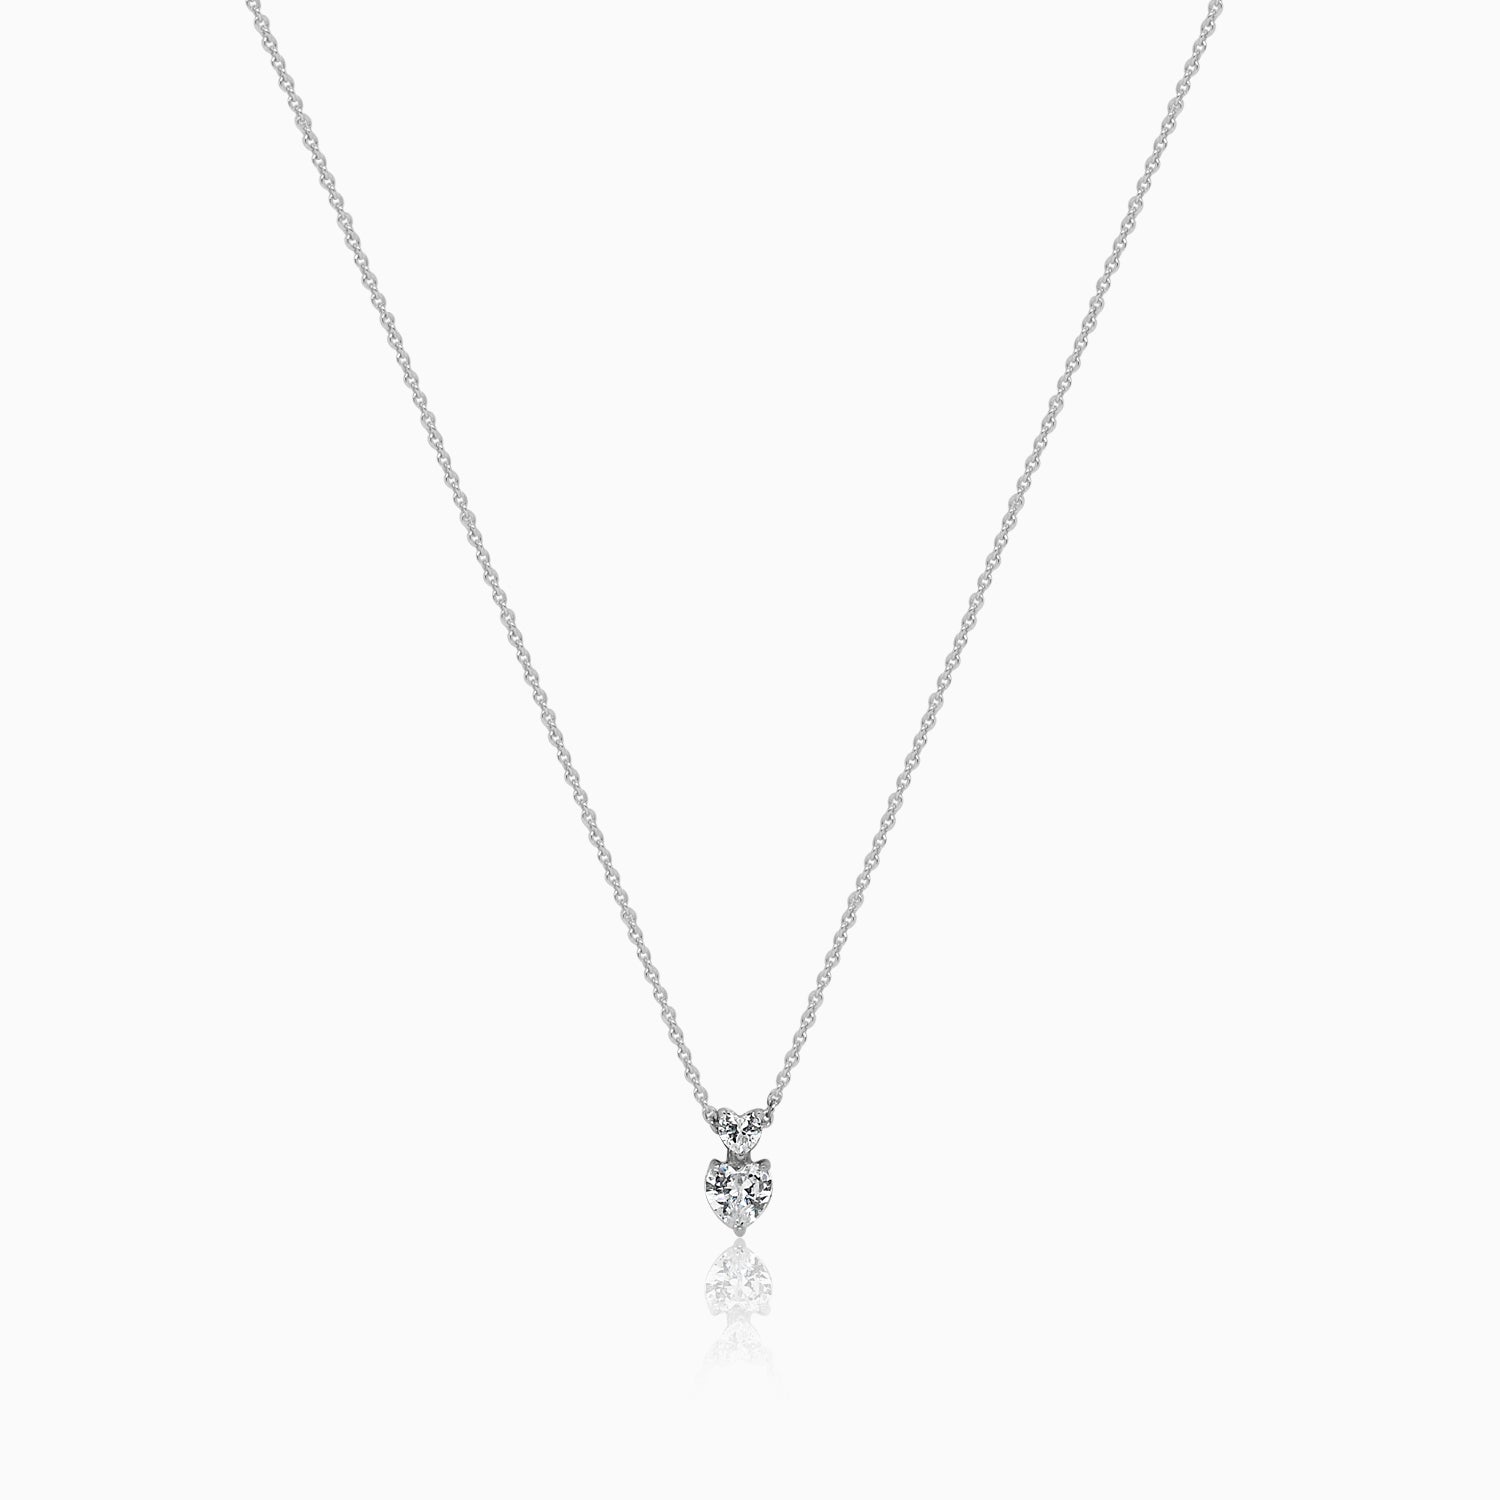 Silver Sparkling Solitaire Heart Embrace Necklace